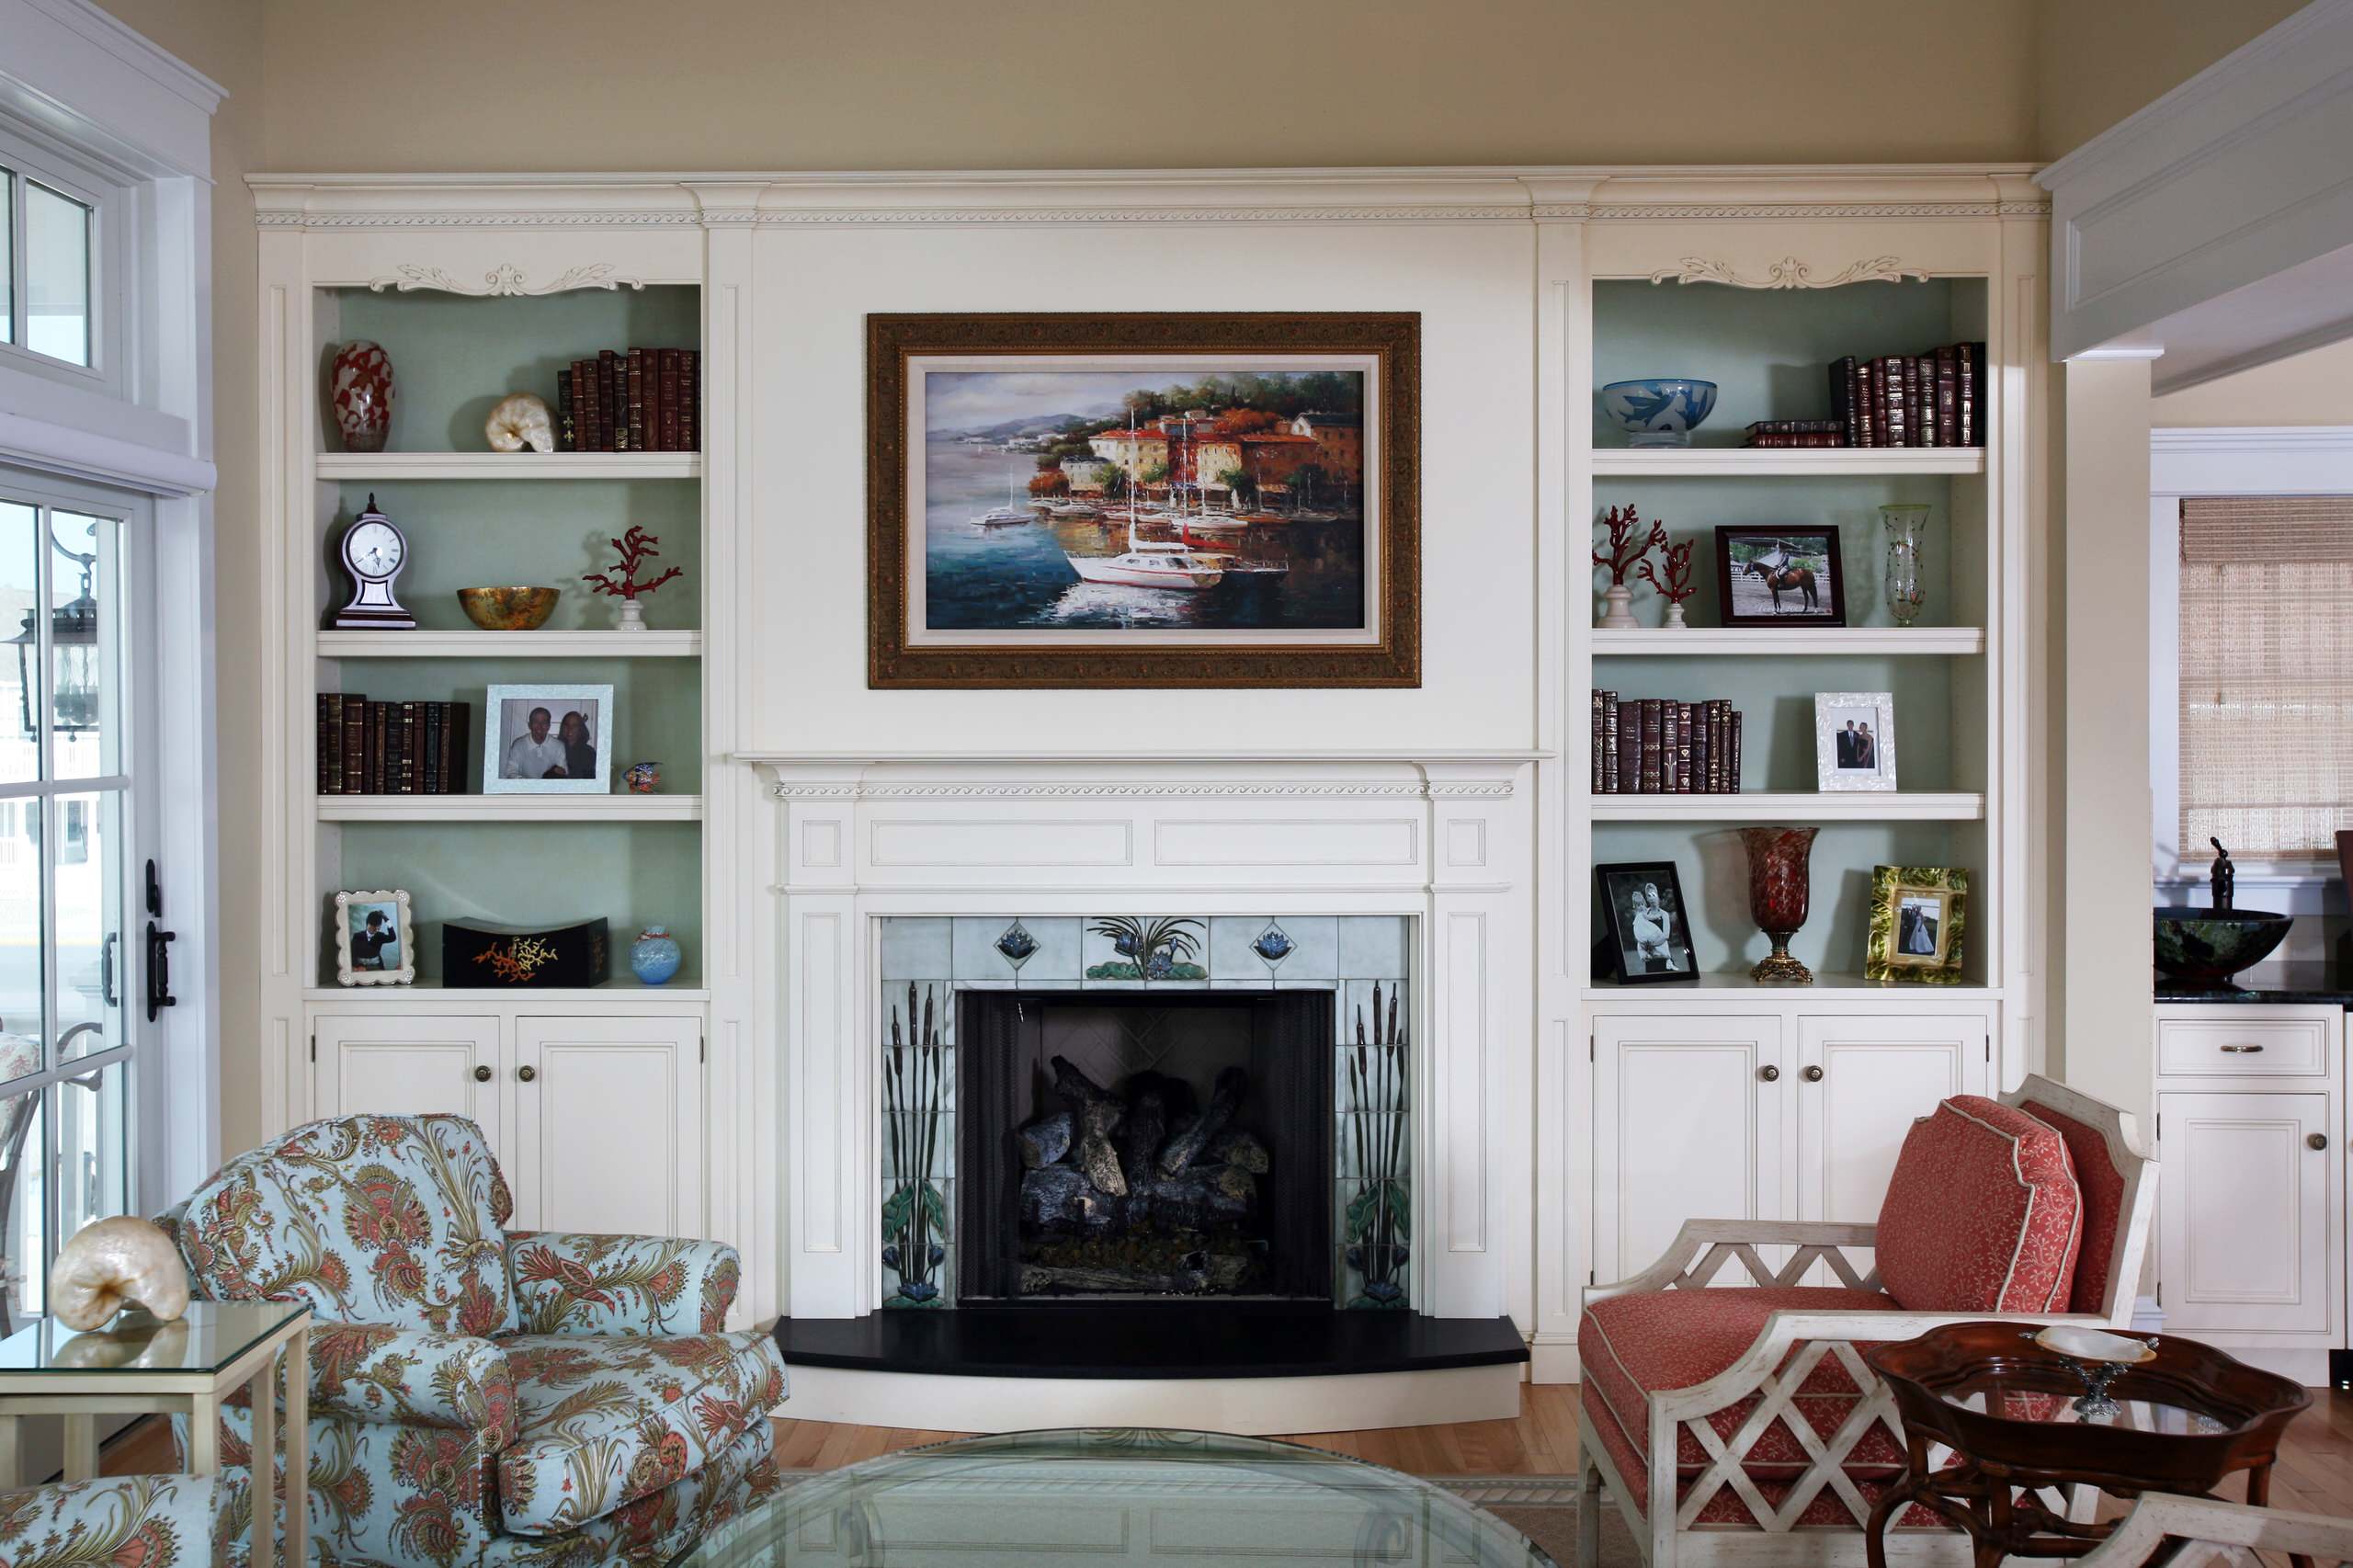 Fireplace Mantel And Bookcase Built Ins - Photos & Ideas | Houzz